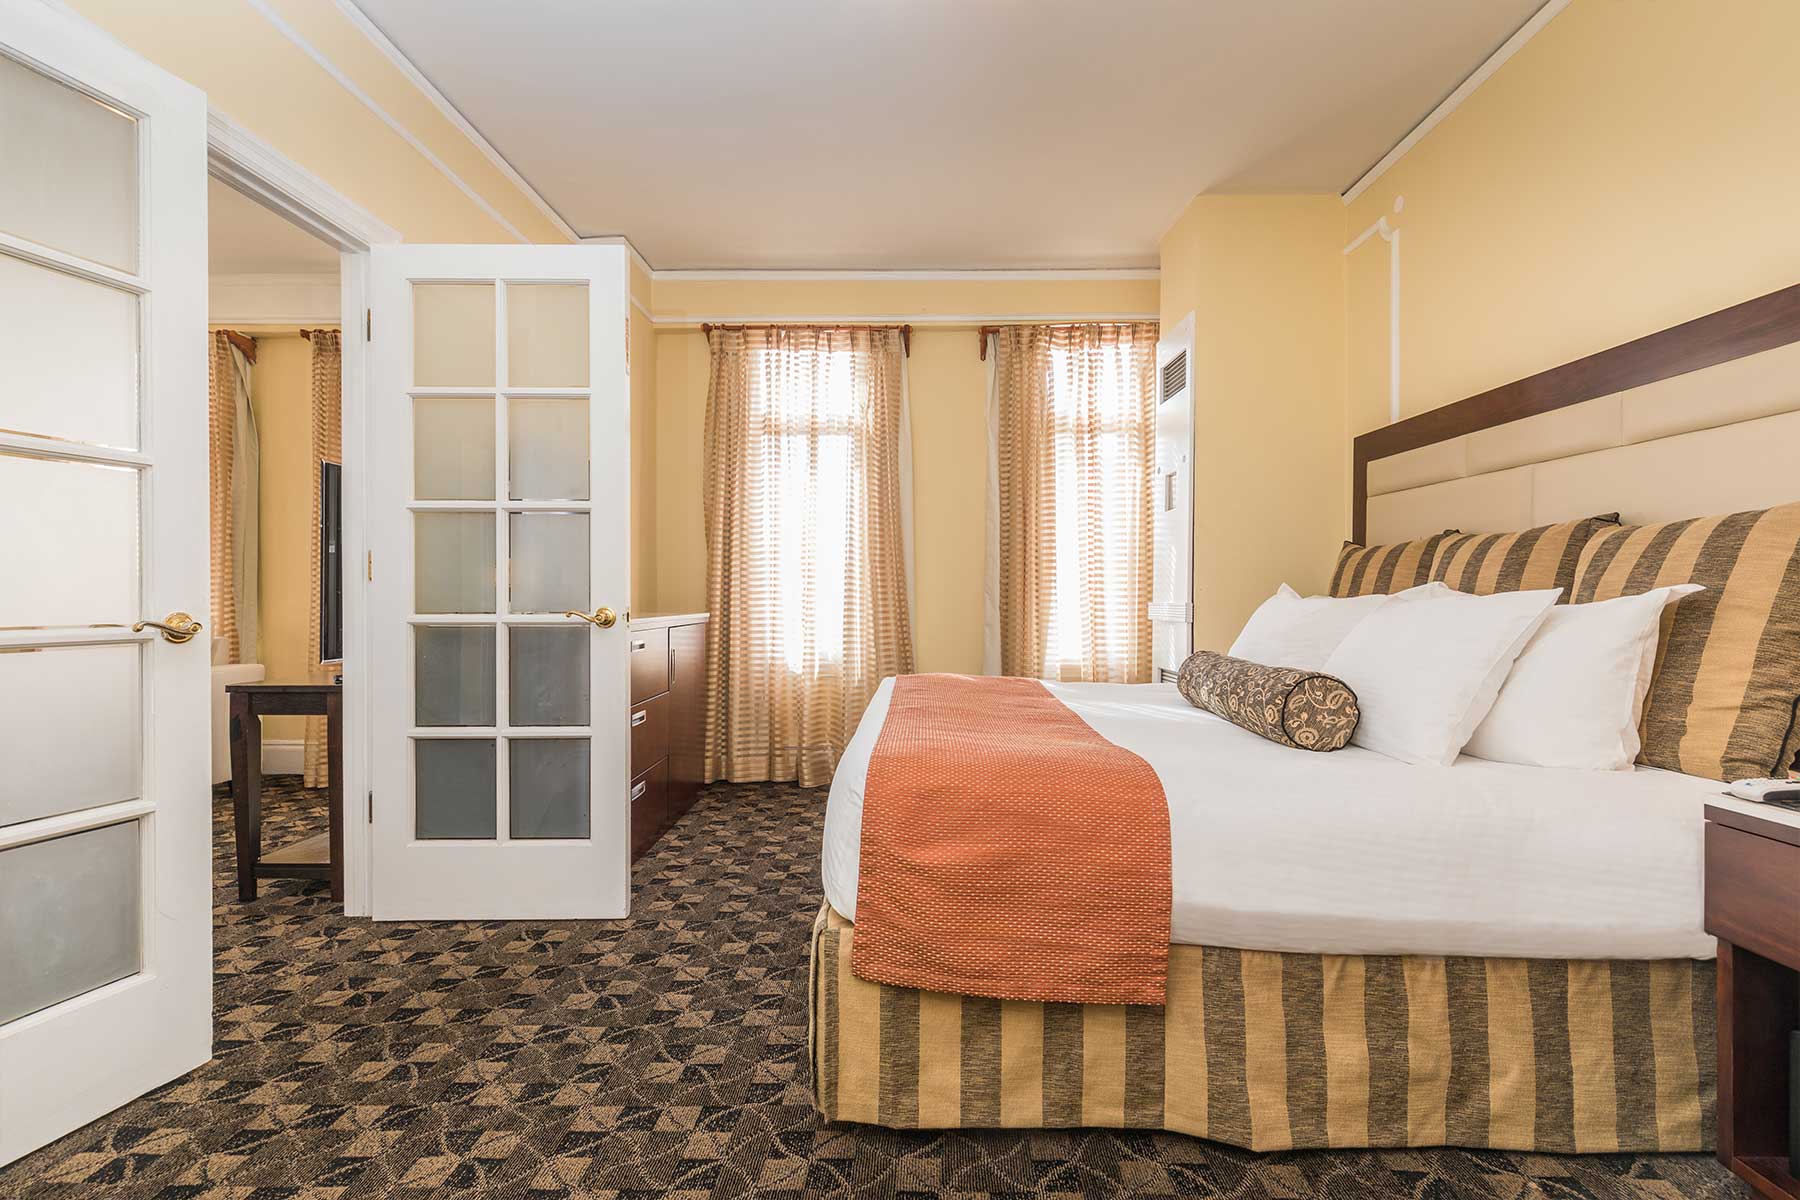 Pickwick Hotel King Room with double doors and windows